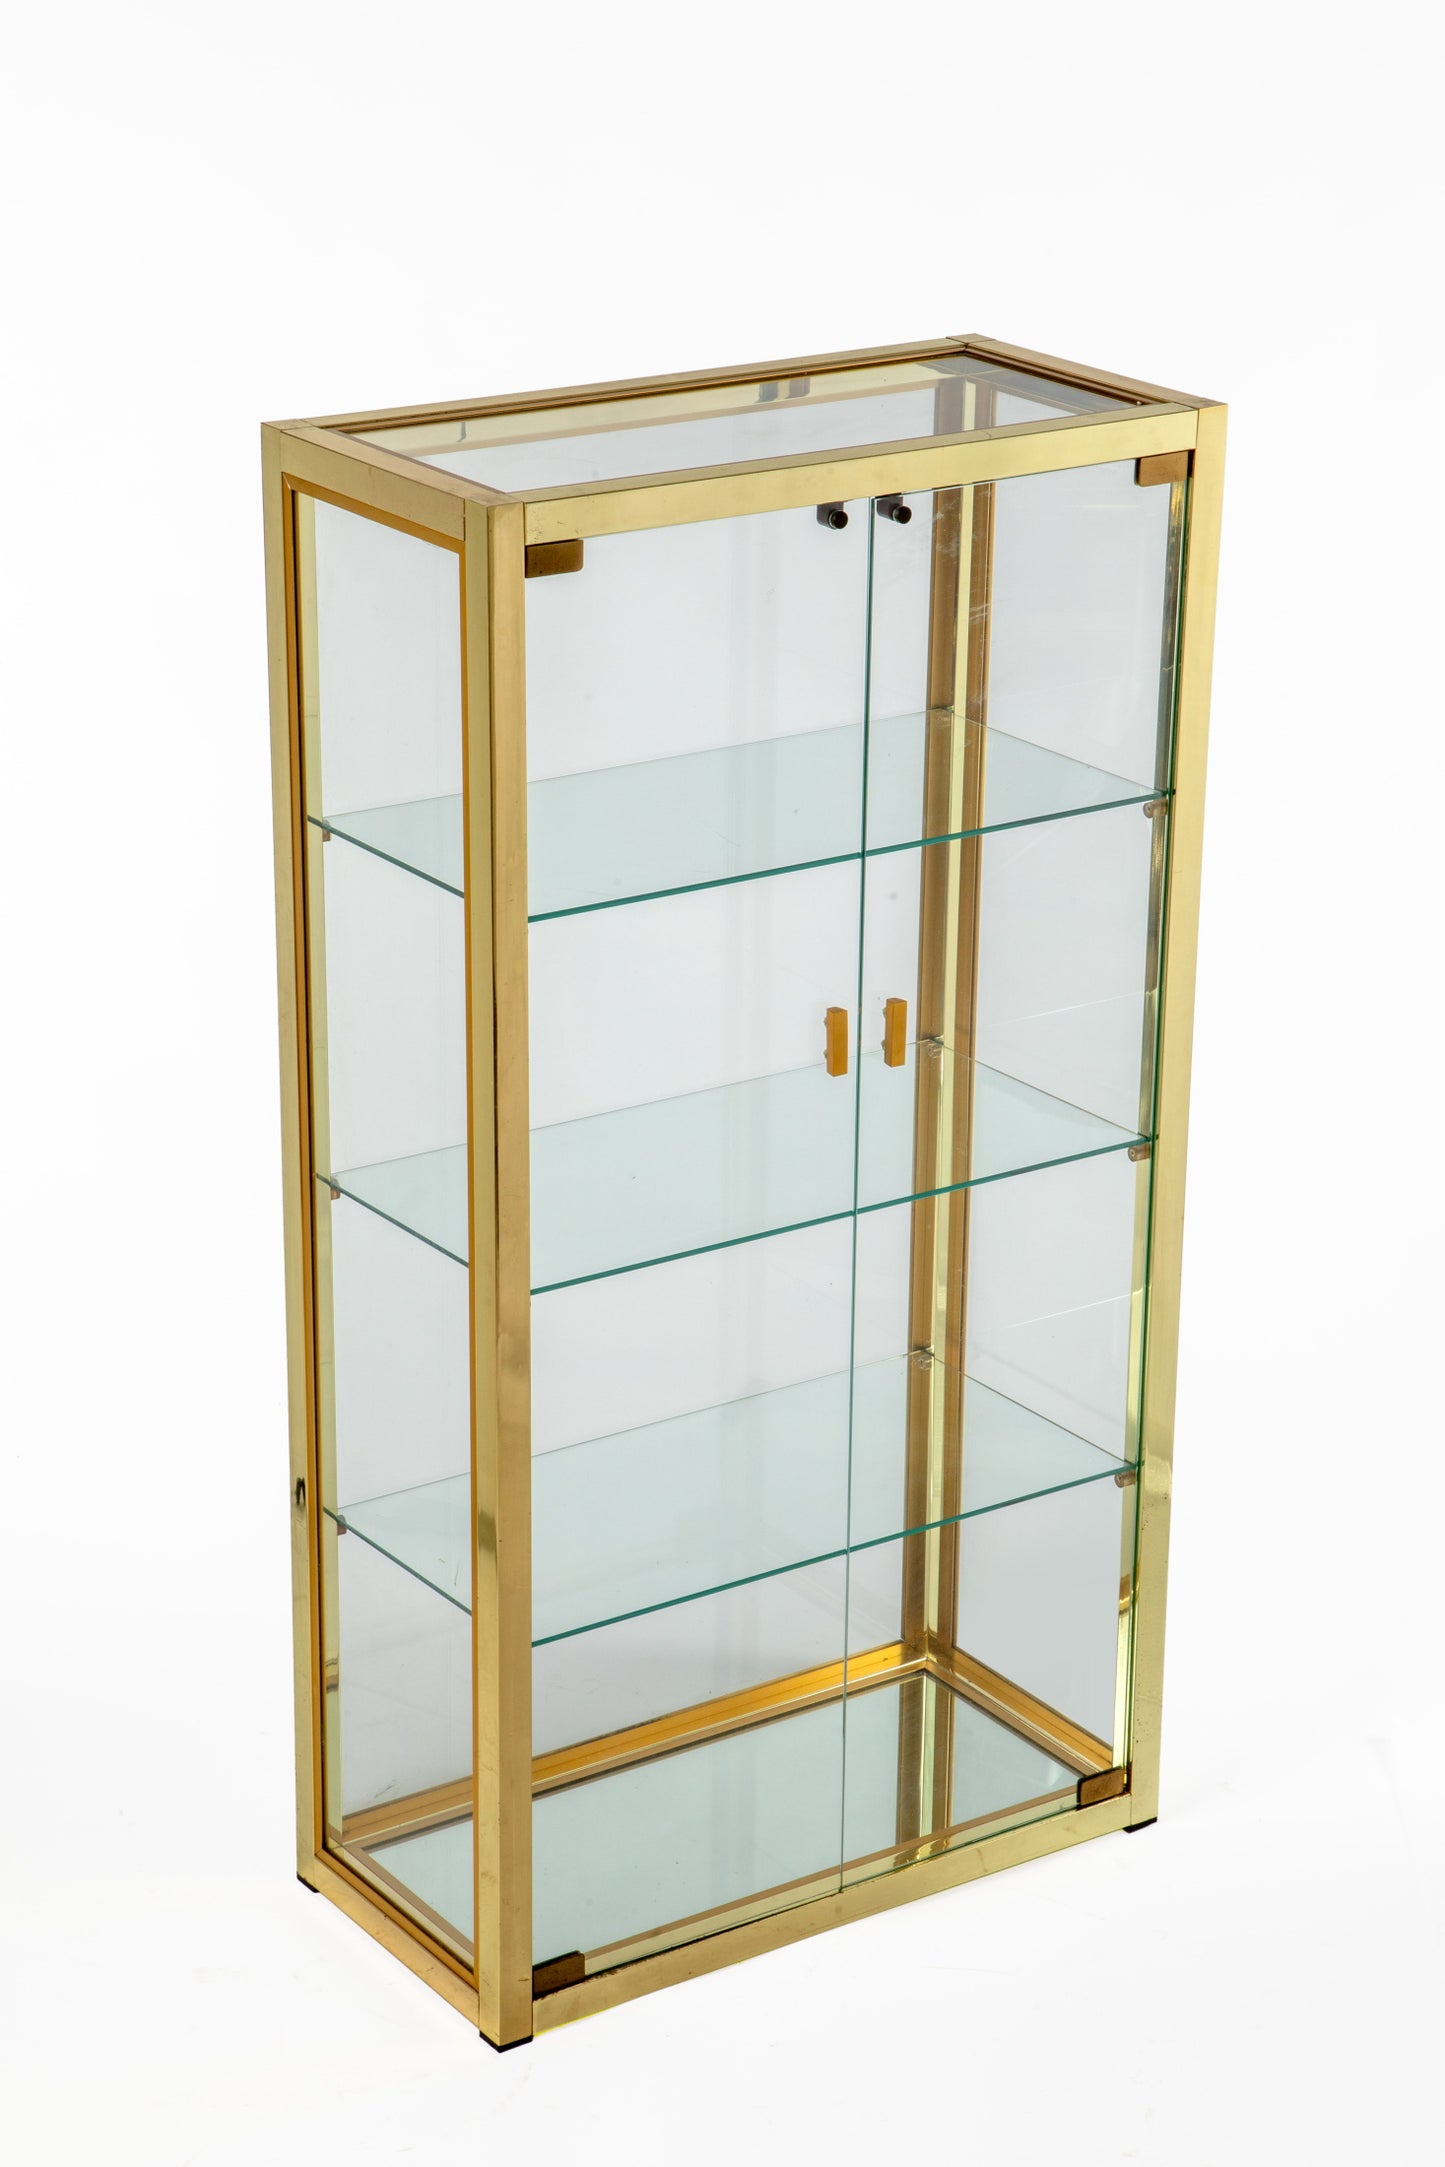 Showcase from the 70s in brass and glass